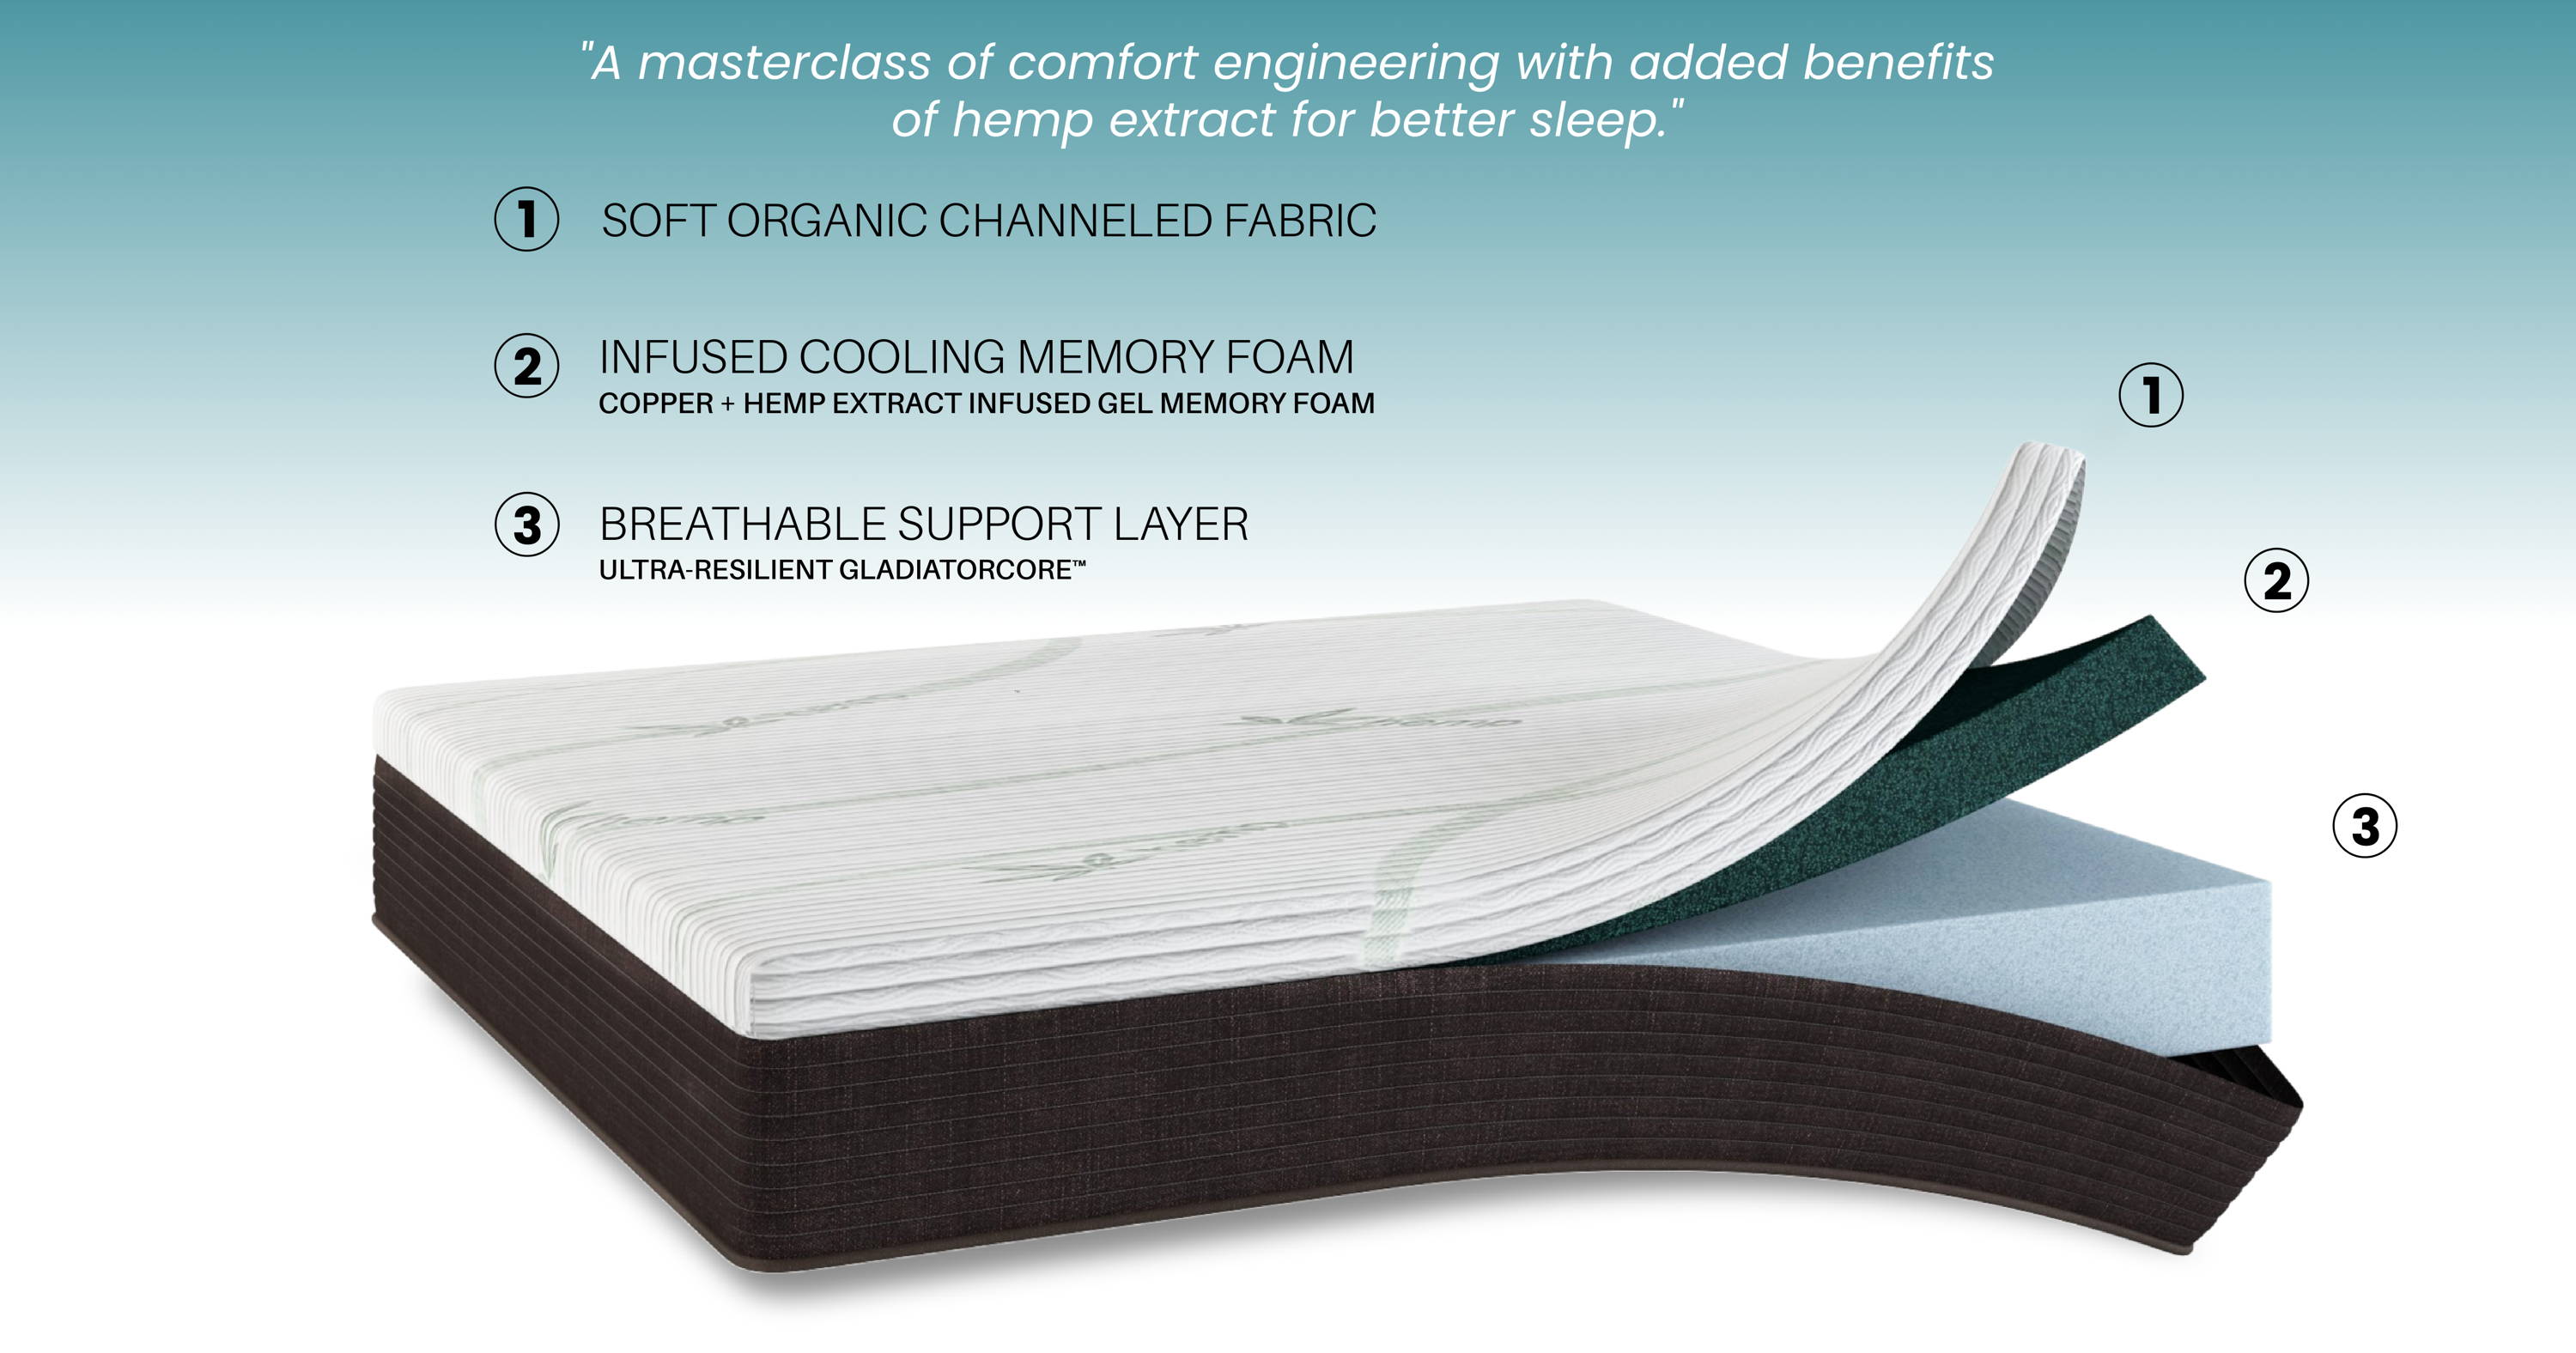 Open mattress with layers showing: Soft organic hemp fabric, CBD and copper-infused cooling memory foam,  and breathable support foam made from plant-based GladiatorCore foam.